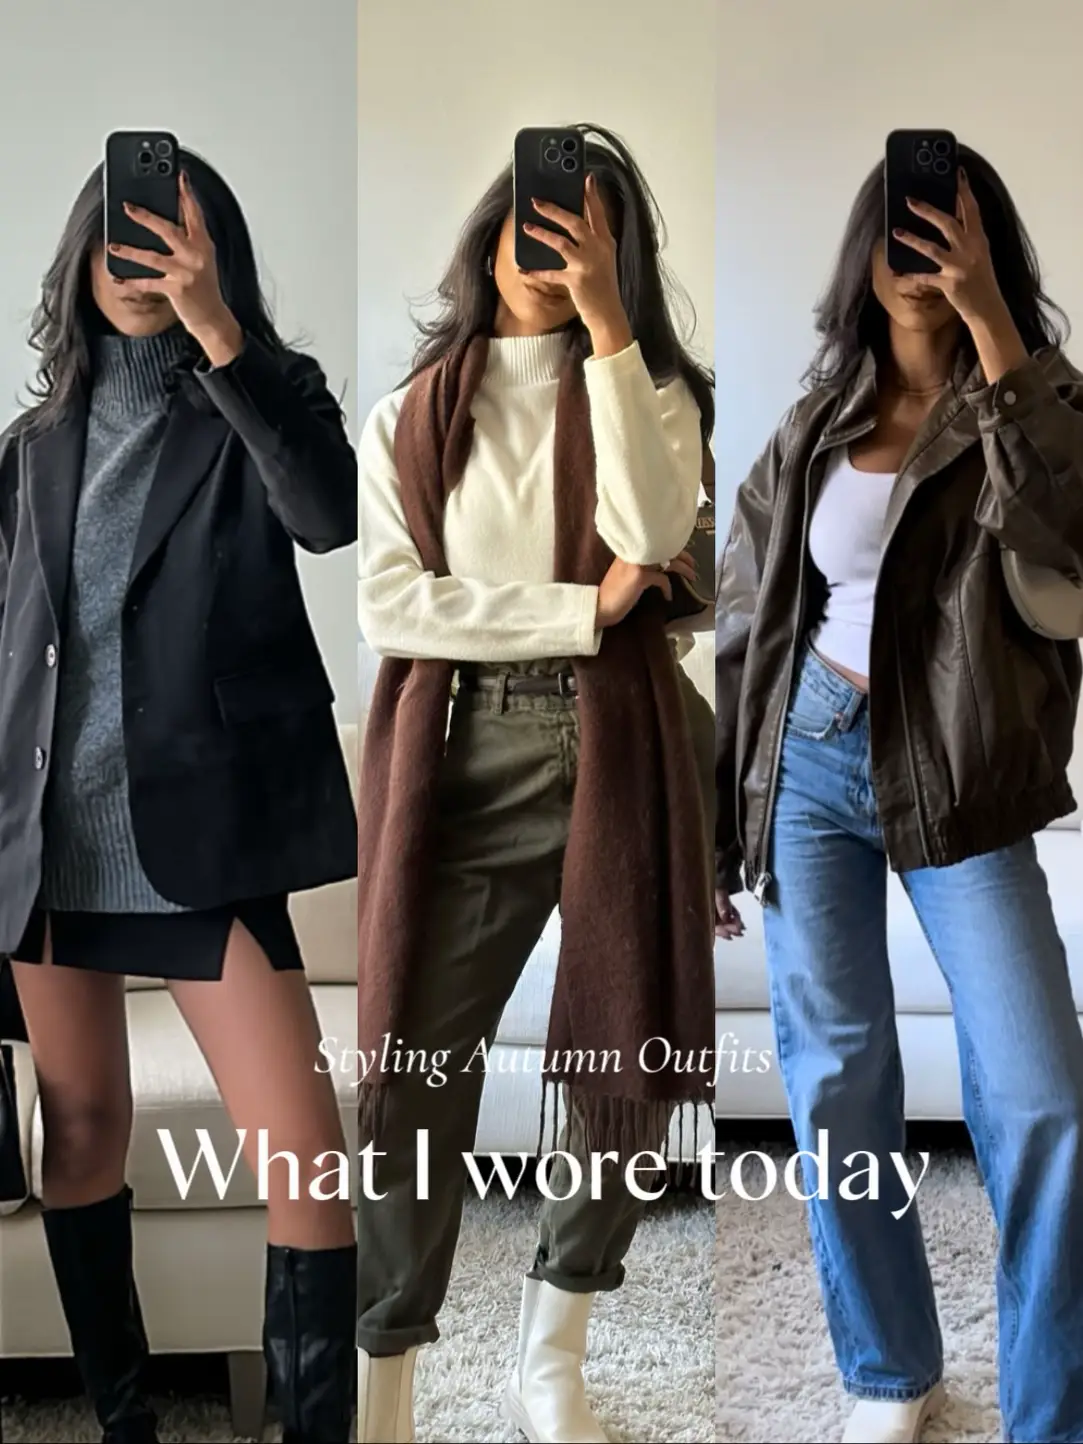 Duster Cardigan Outfit Idea for Early Fall - Meagan's Moda